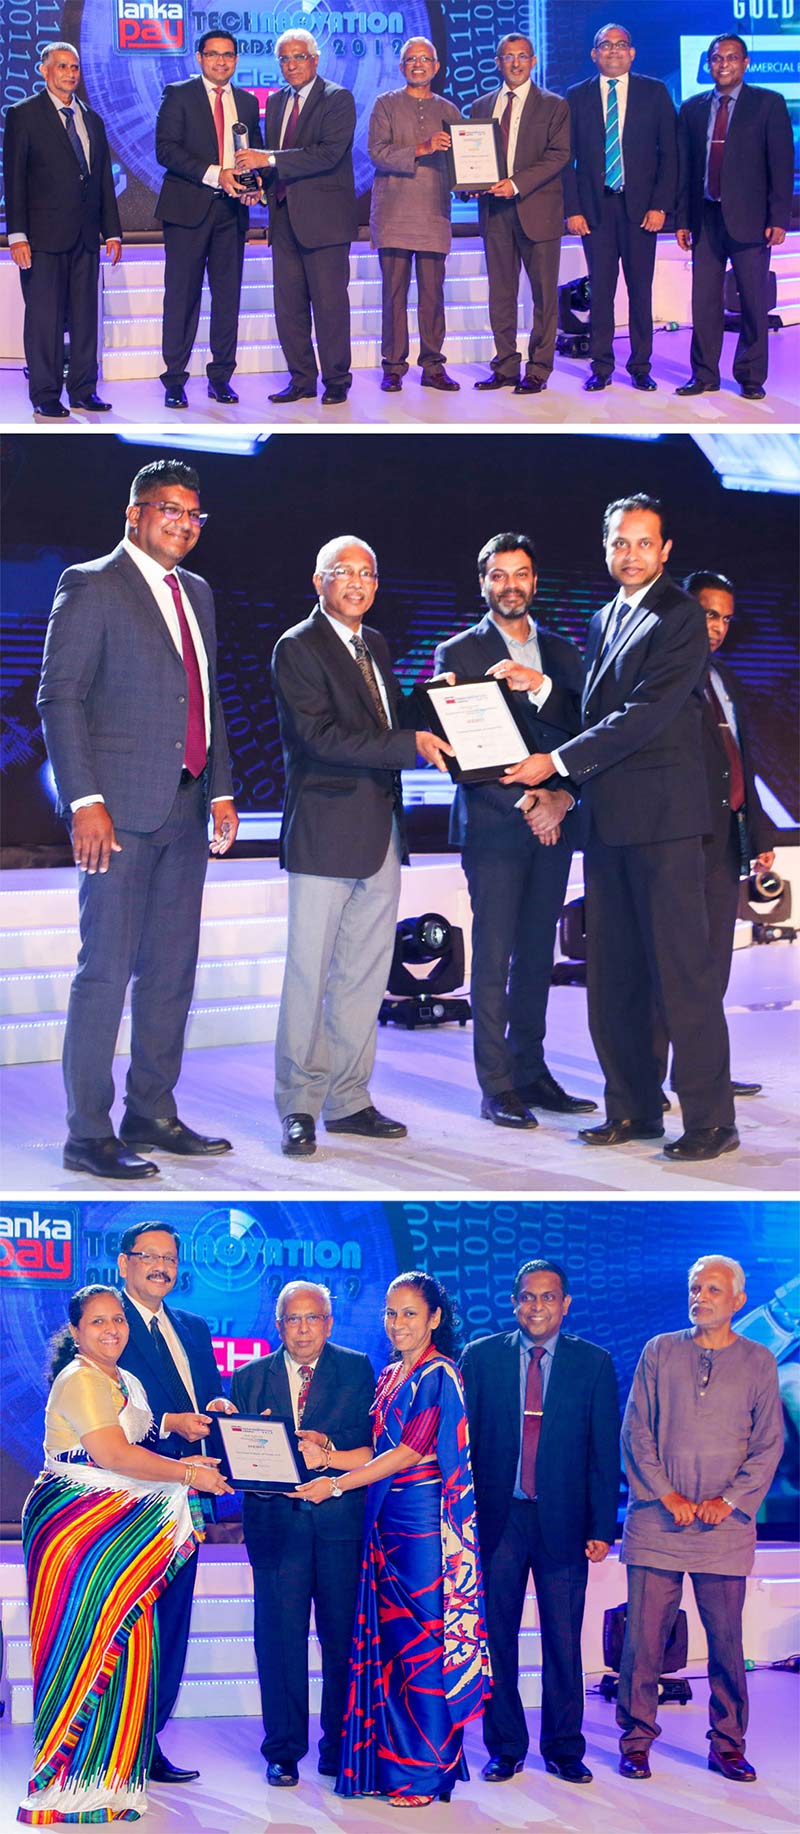 Commercial Bank’s Chief Operating Officer Mr Sanath Manatunge (Top, second left) and representatives of the Bank’s senior management receiving the awards won by the Bank at the LankaPay Technovation Awards.